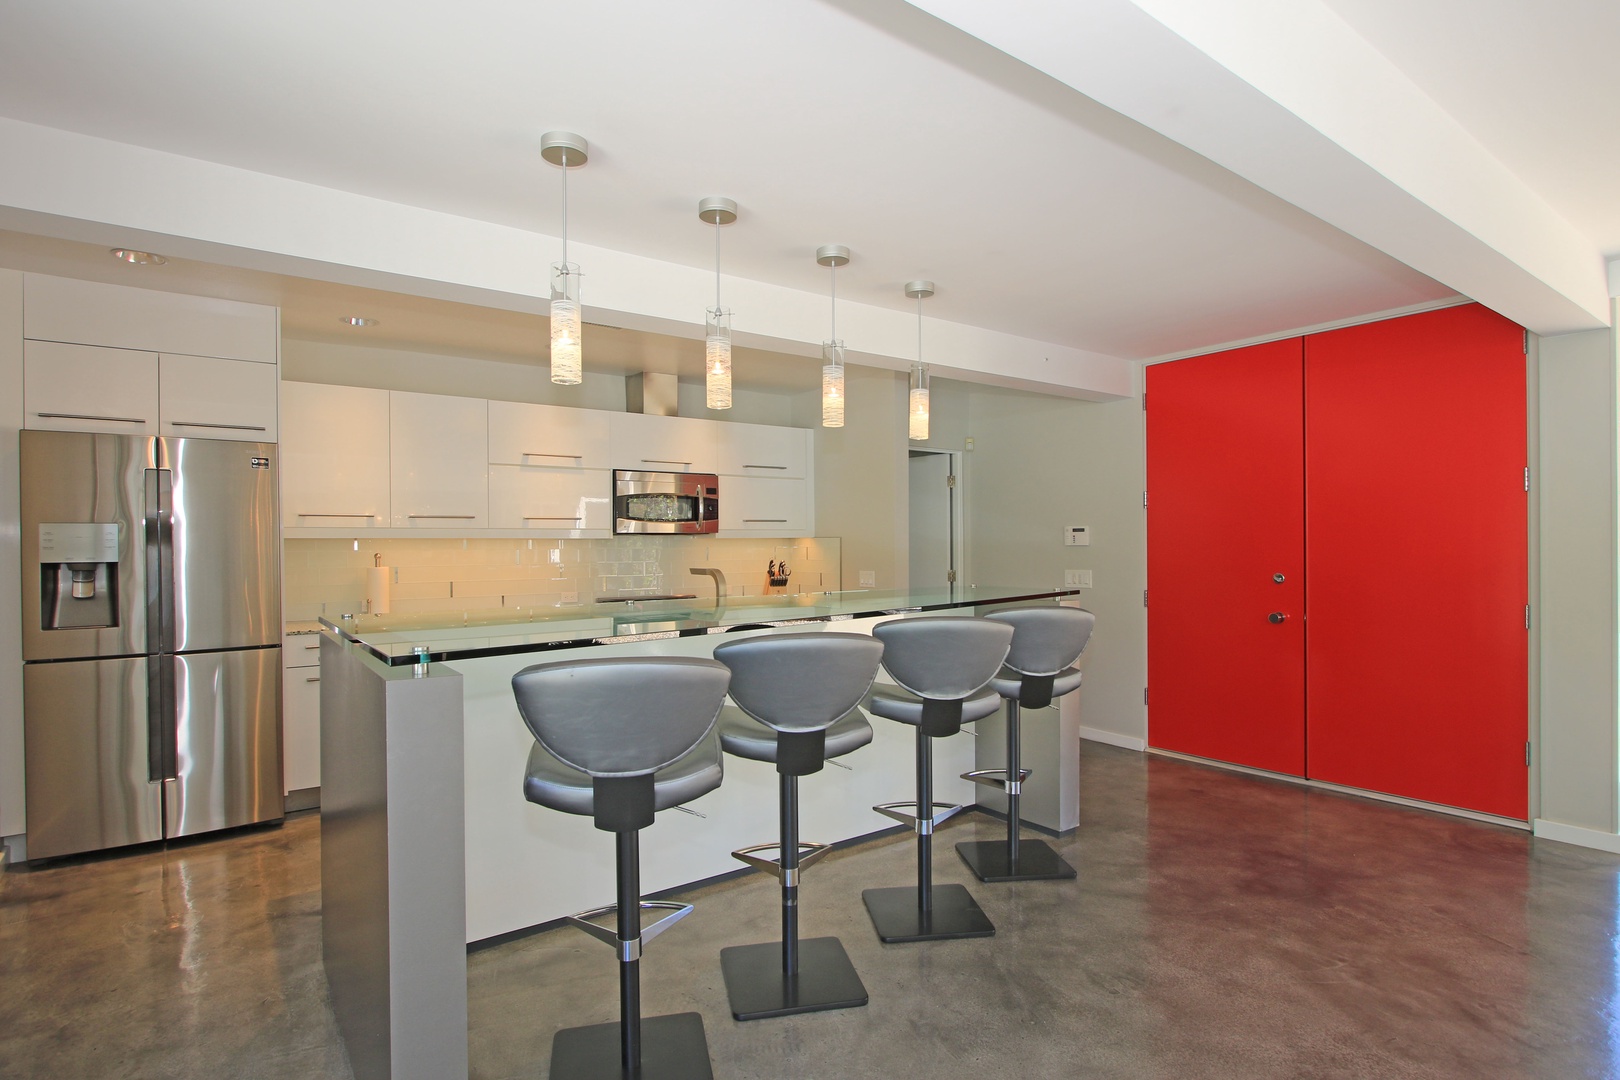 Kitchen Bar Seating and That Red Door!